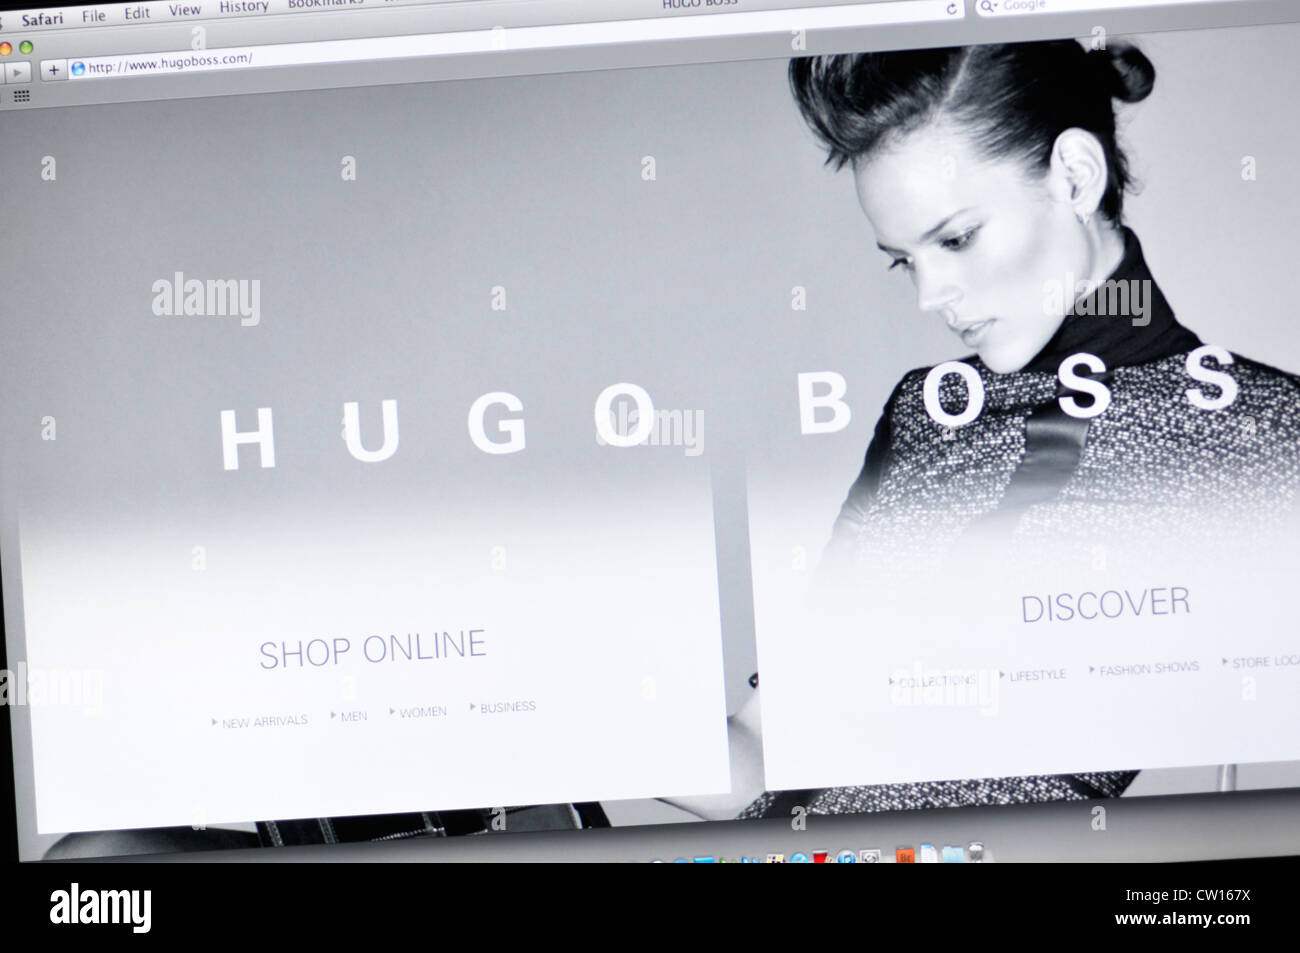 BOSS website - German fashion and style house Stock Photo - Alamy